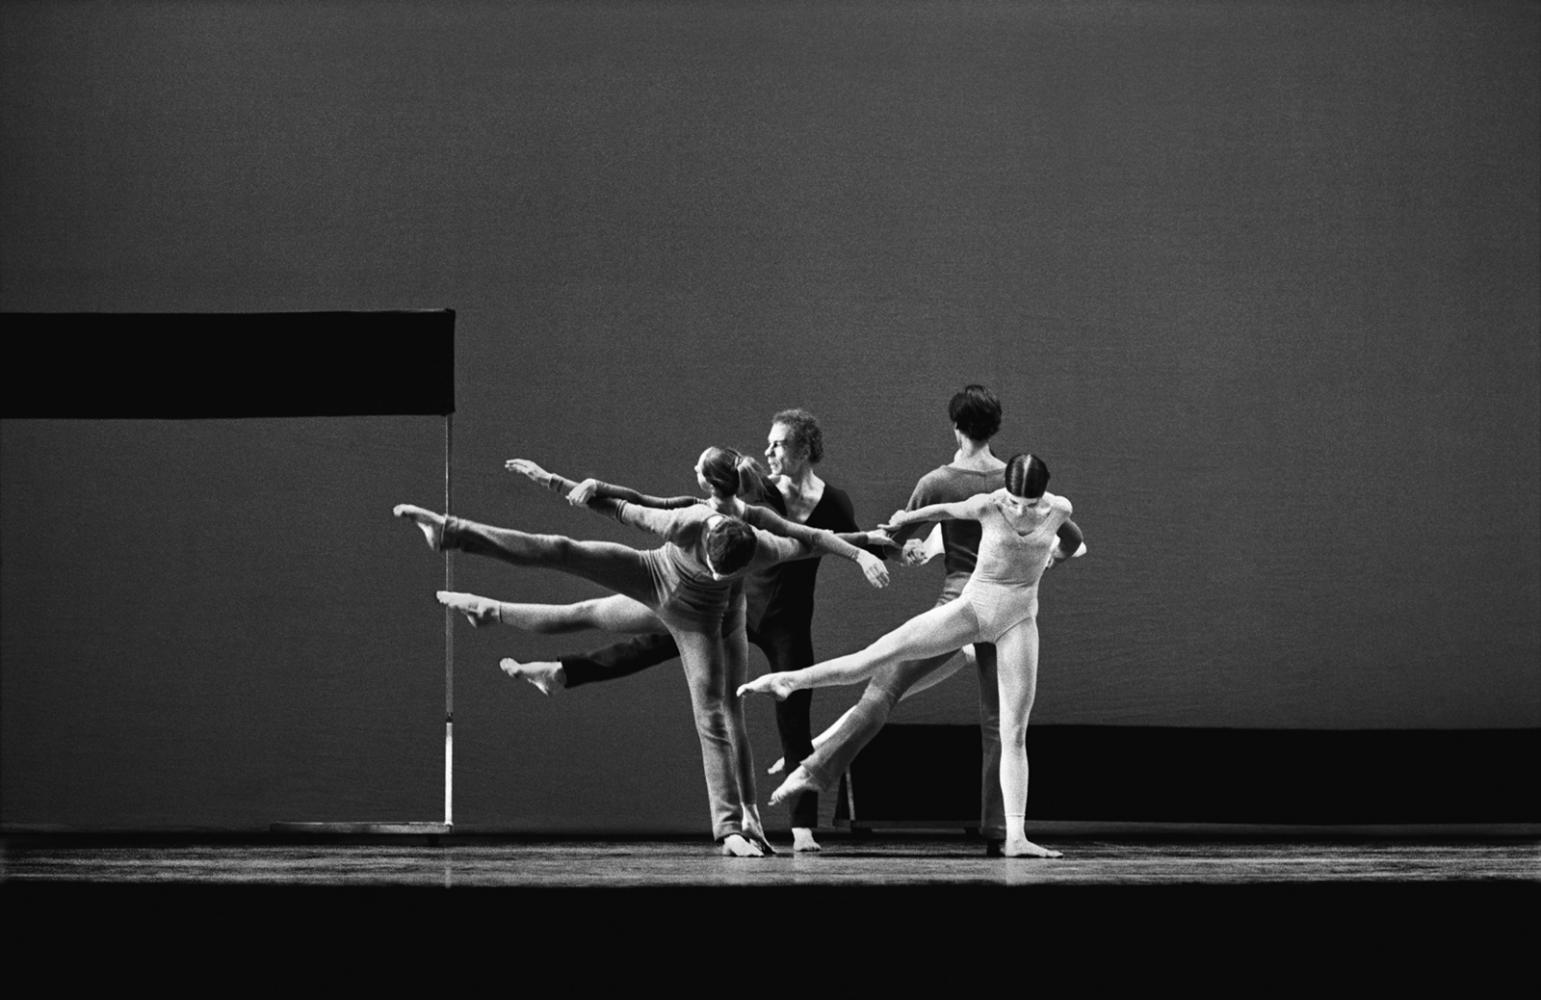 "˜That Single Fleeting Moment': Merce Cunningham in Images